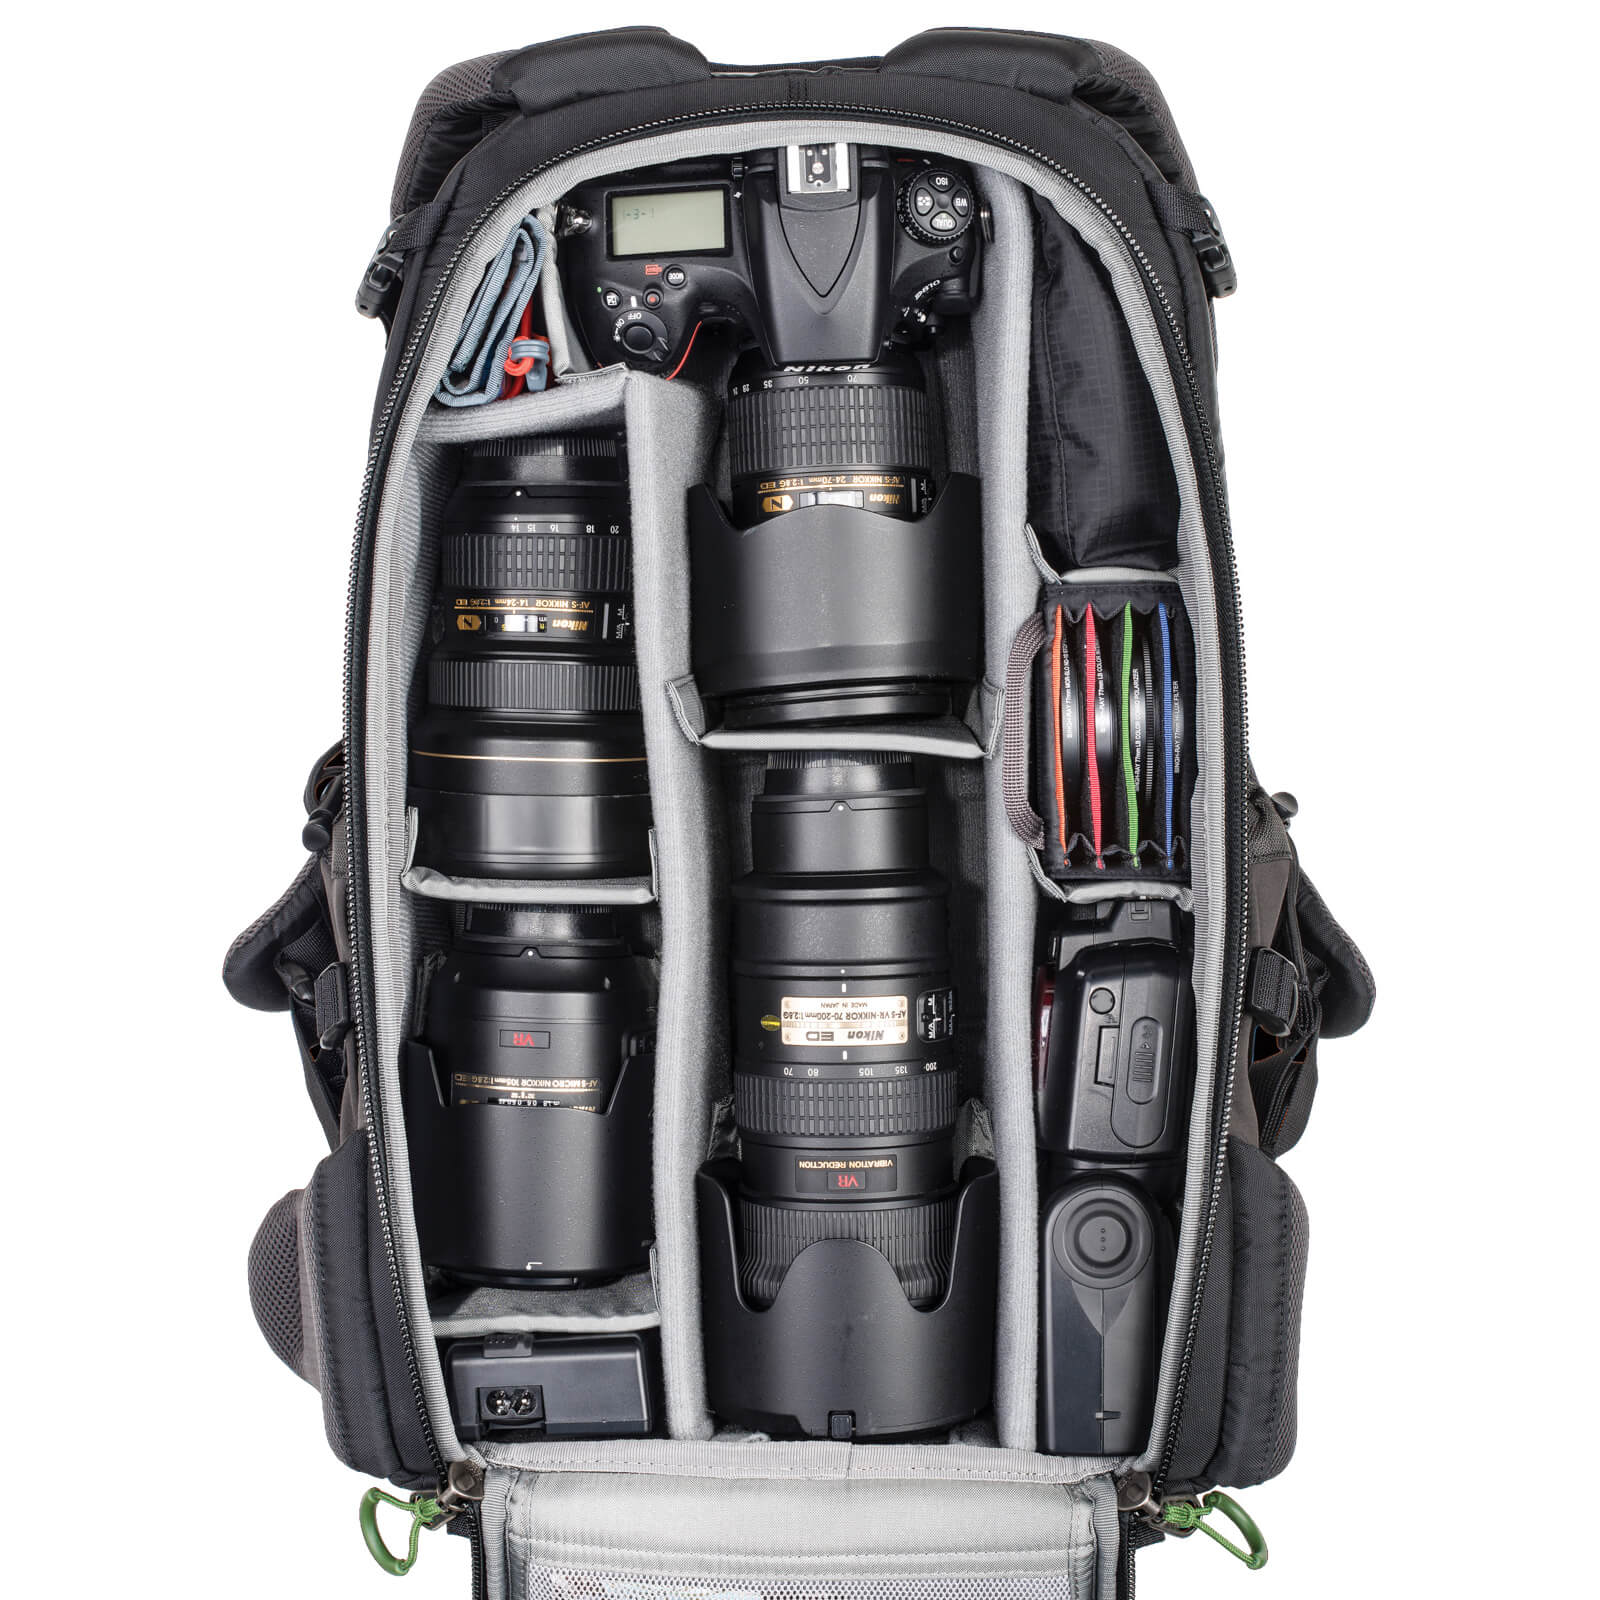 Nikon DSLR gear layout. Holds 1 standard-size DSLR and 4-6 standard zoom lenses plus a flash OR holds 2 large mirrorless DSLRs and 5-7 lenses plus a flash